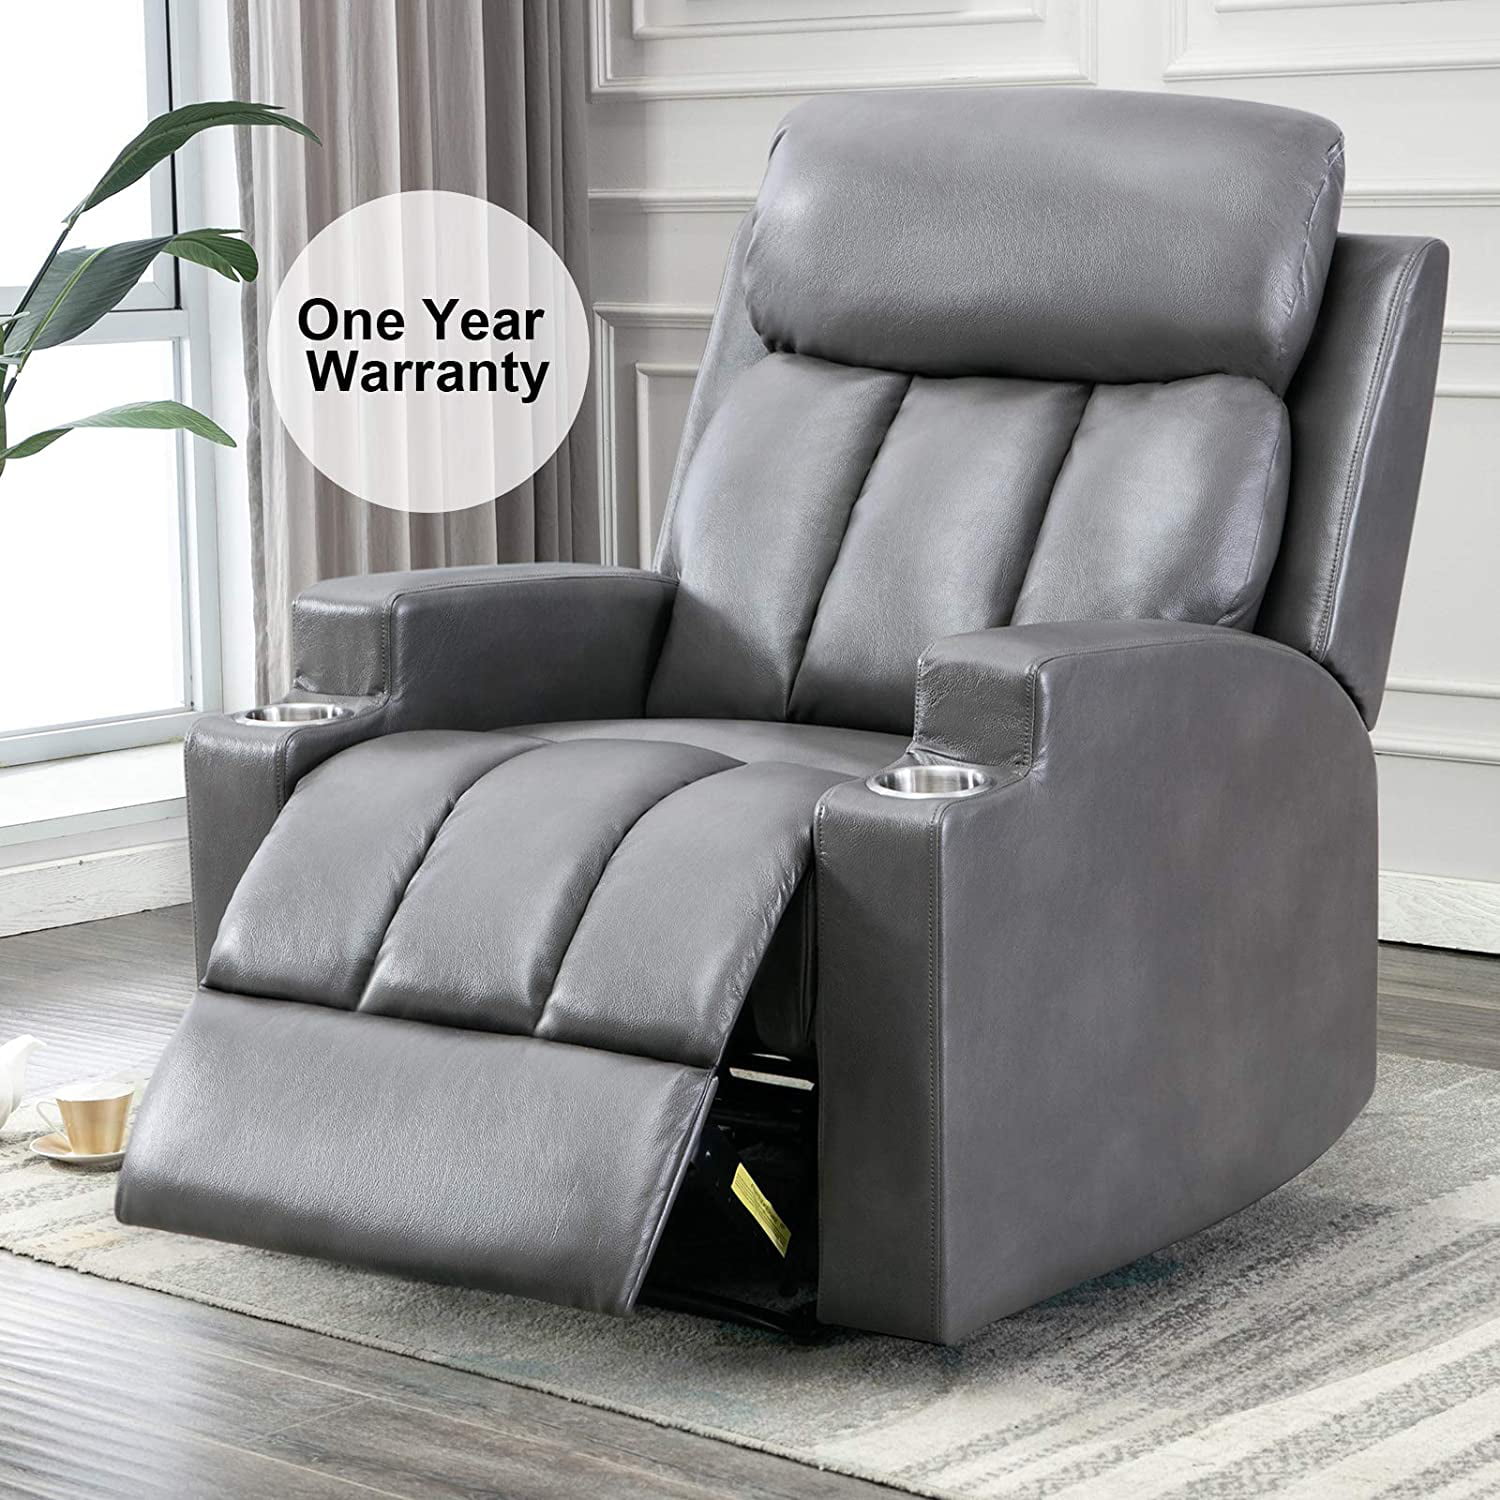 Breathable Pu Leather Recliner Chair, Leather Reclining Chair With Cup Holders